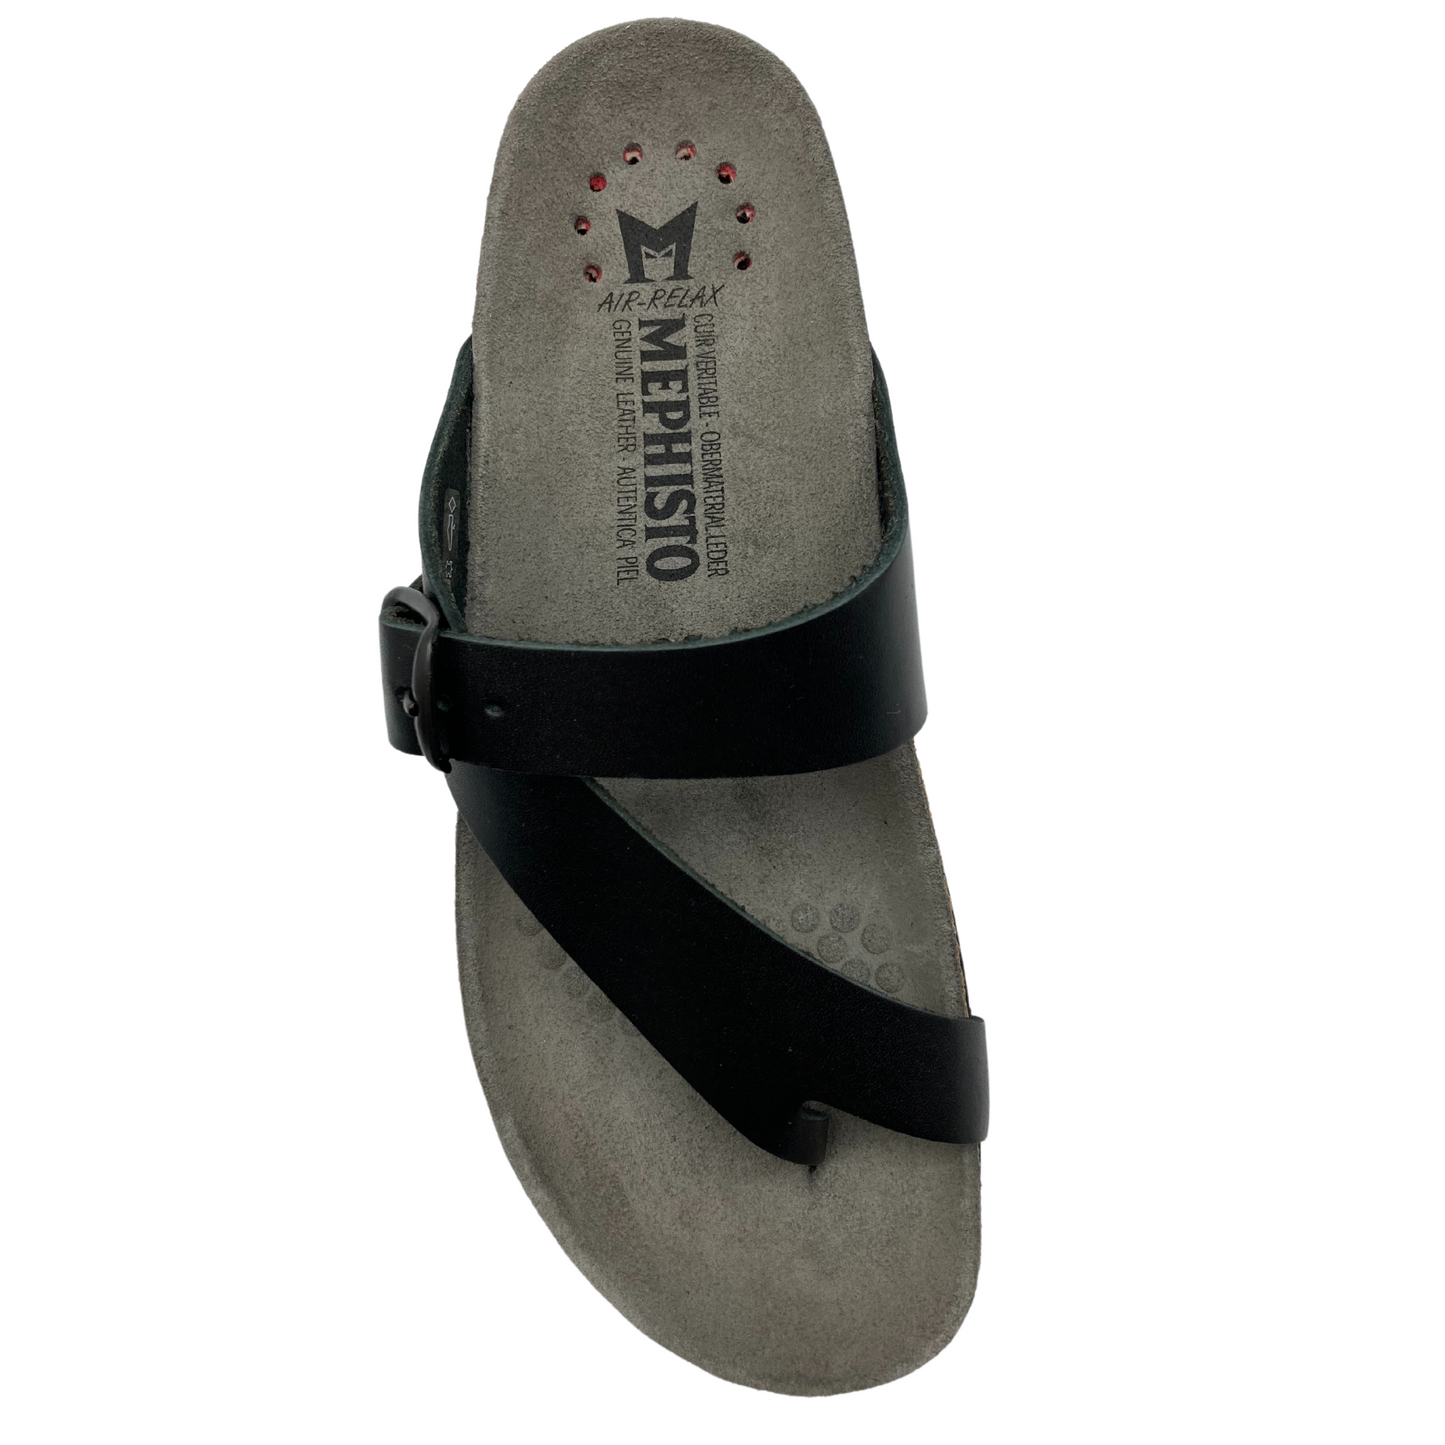 The top view of the right sandal. Black straps with grey suede covered footbed.